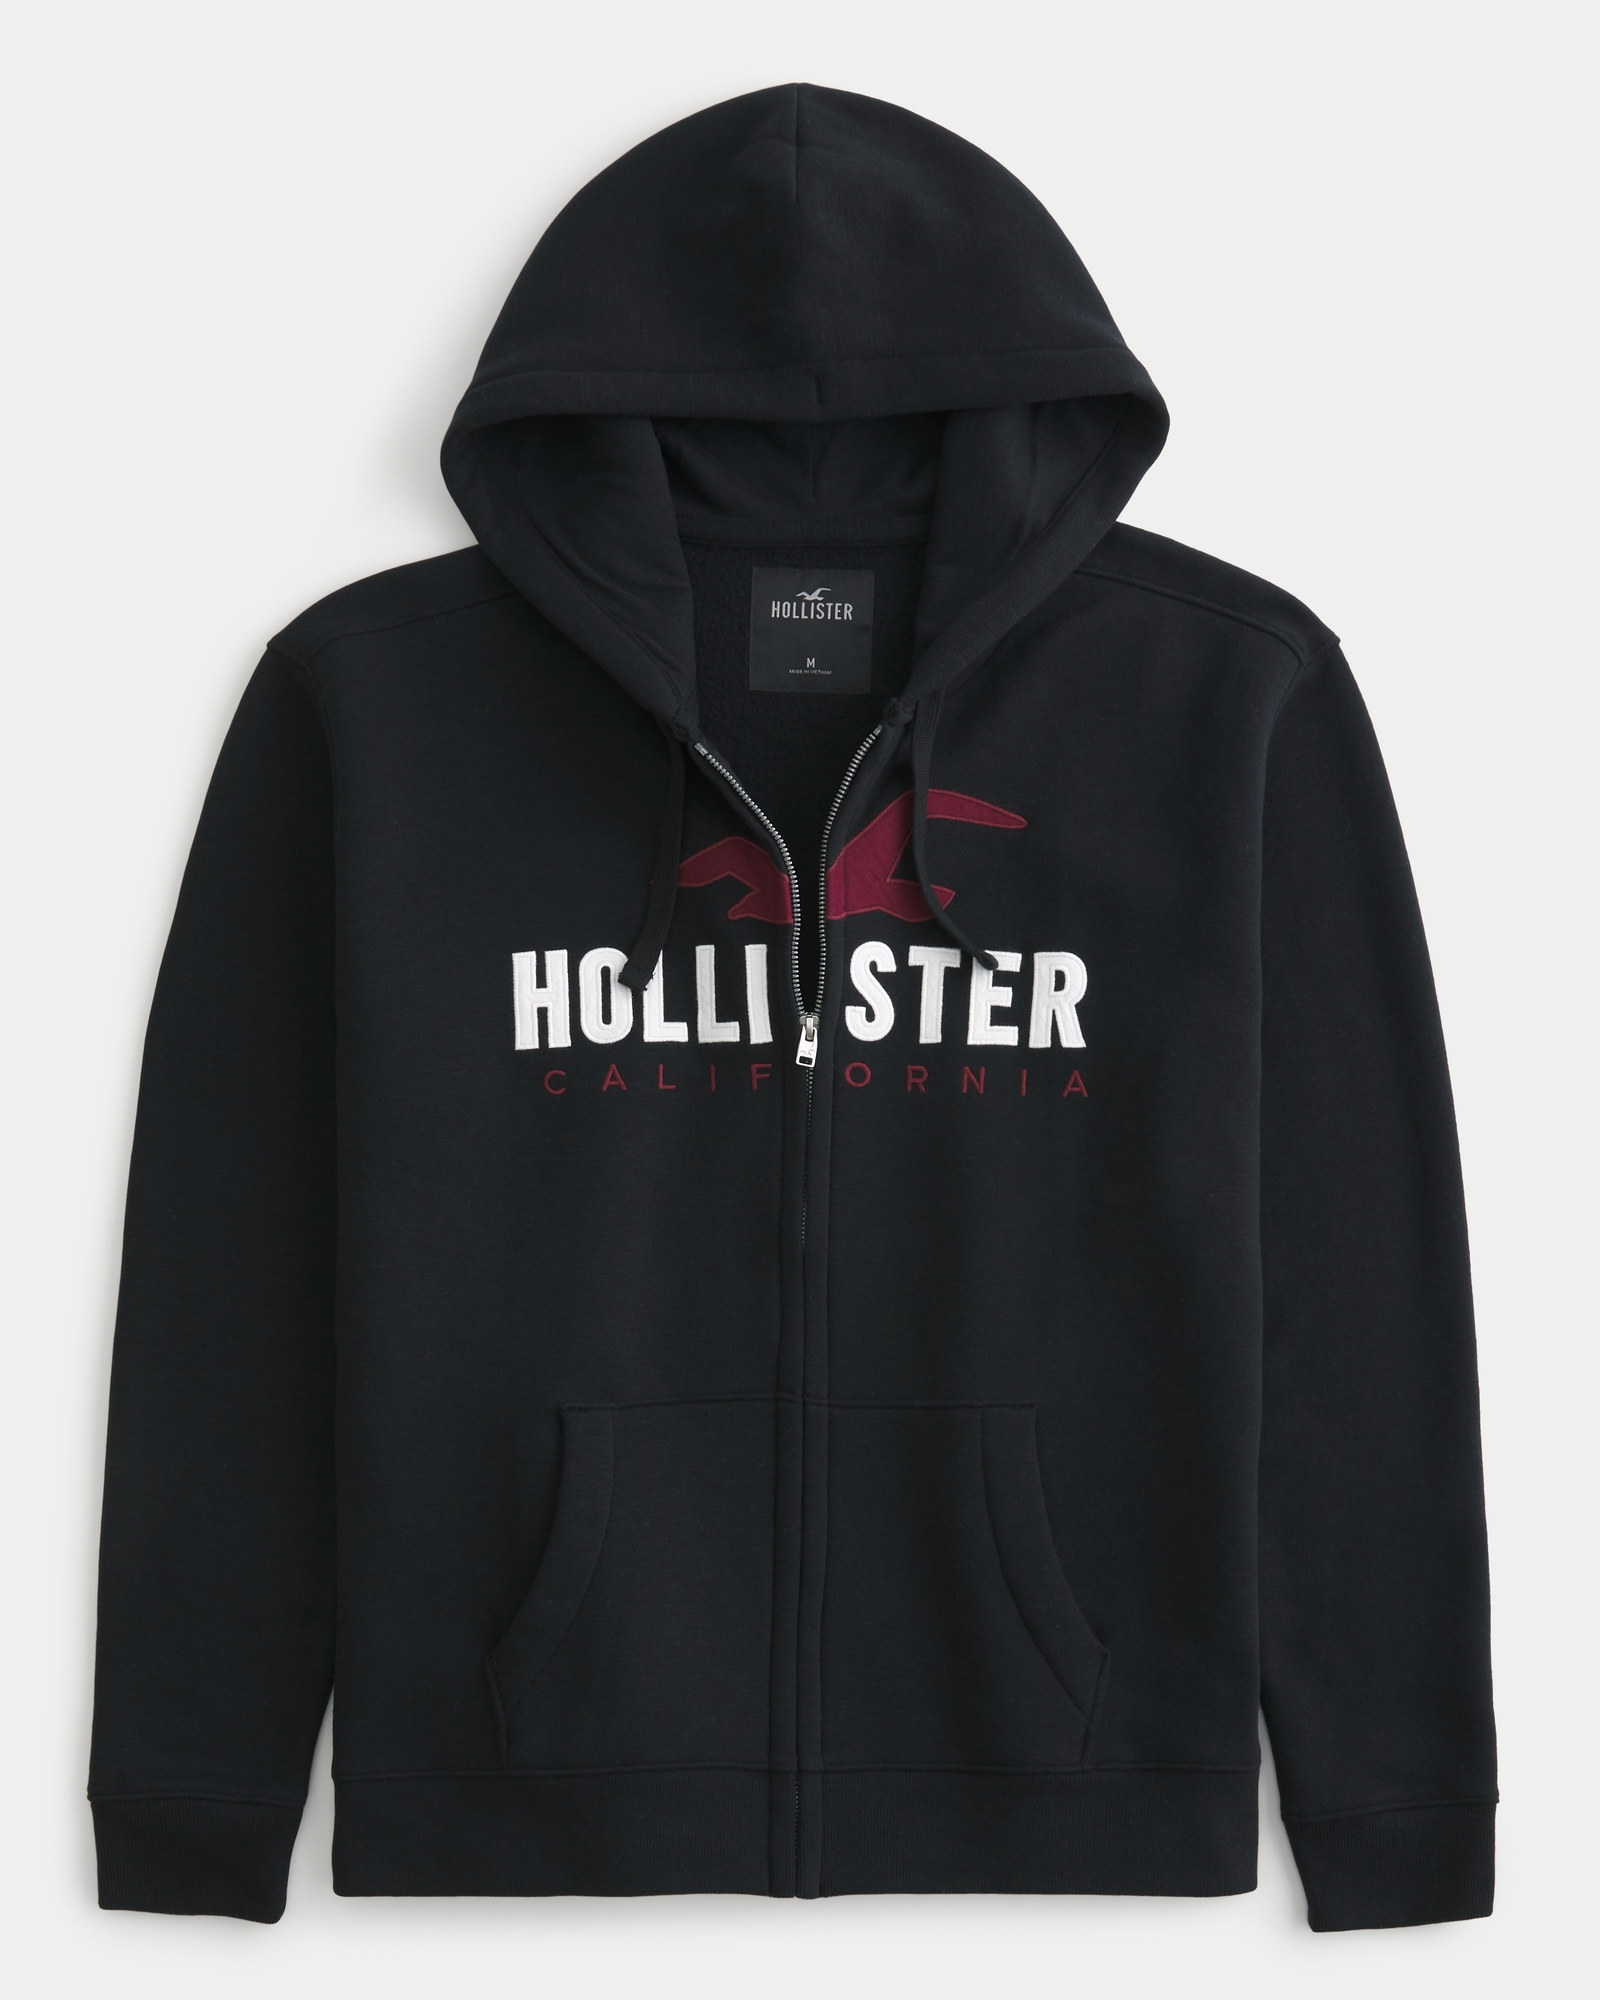 https://img.hollisterco.com/is/image/anf/KIC_322-4068-0005-900_prod1.jpg?policy=product-extra-large